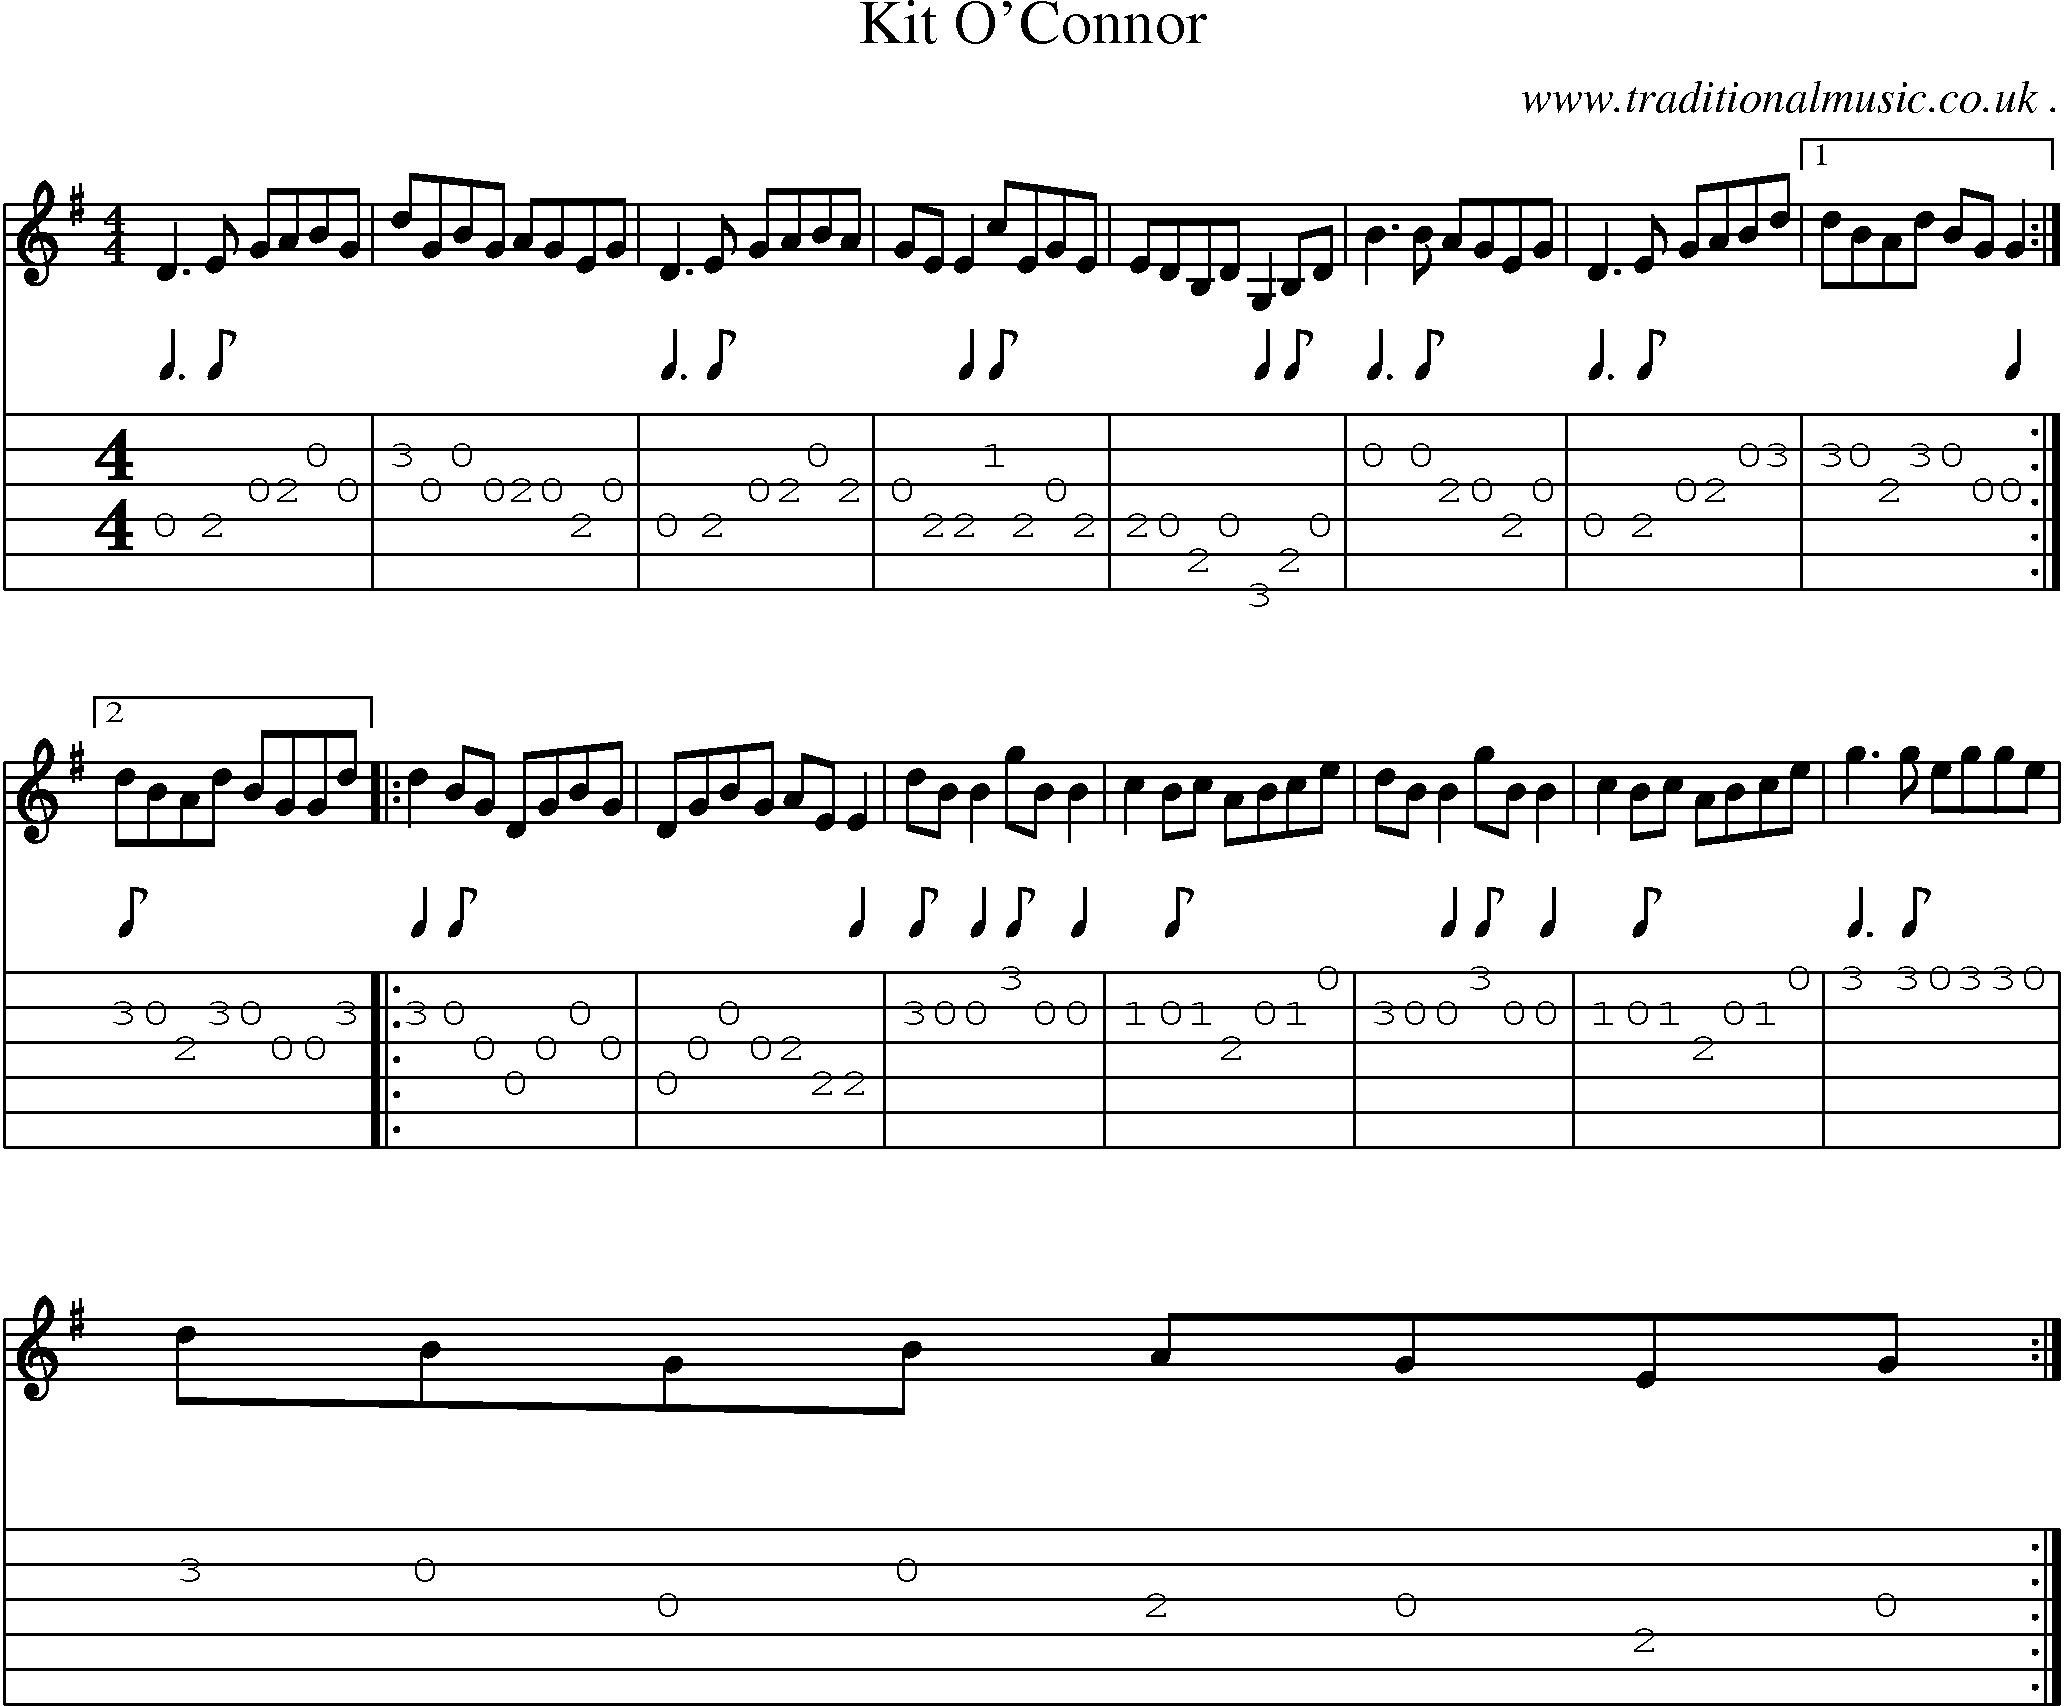 Sheet-Music and Guitar Tabs for Kit Oconnor